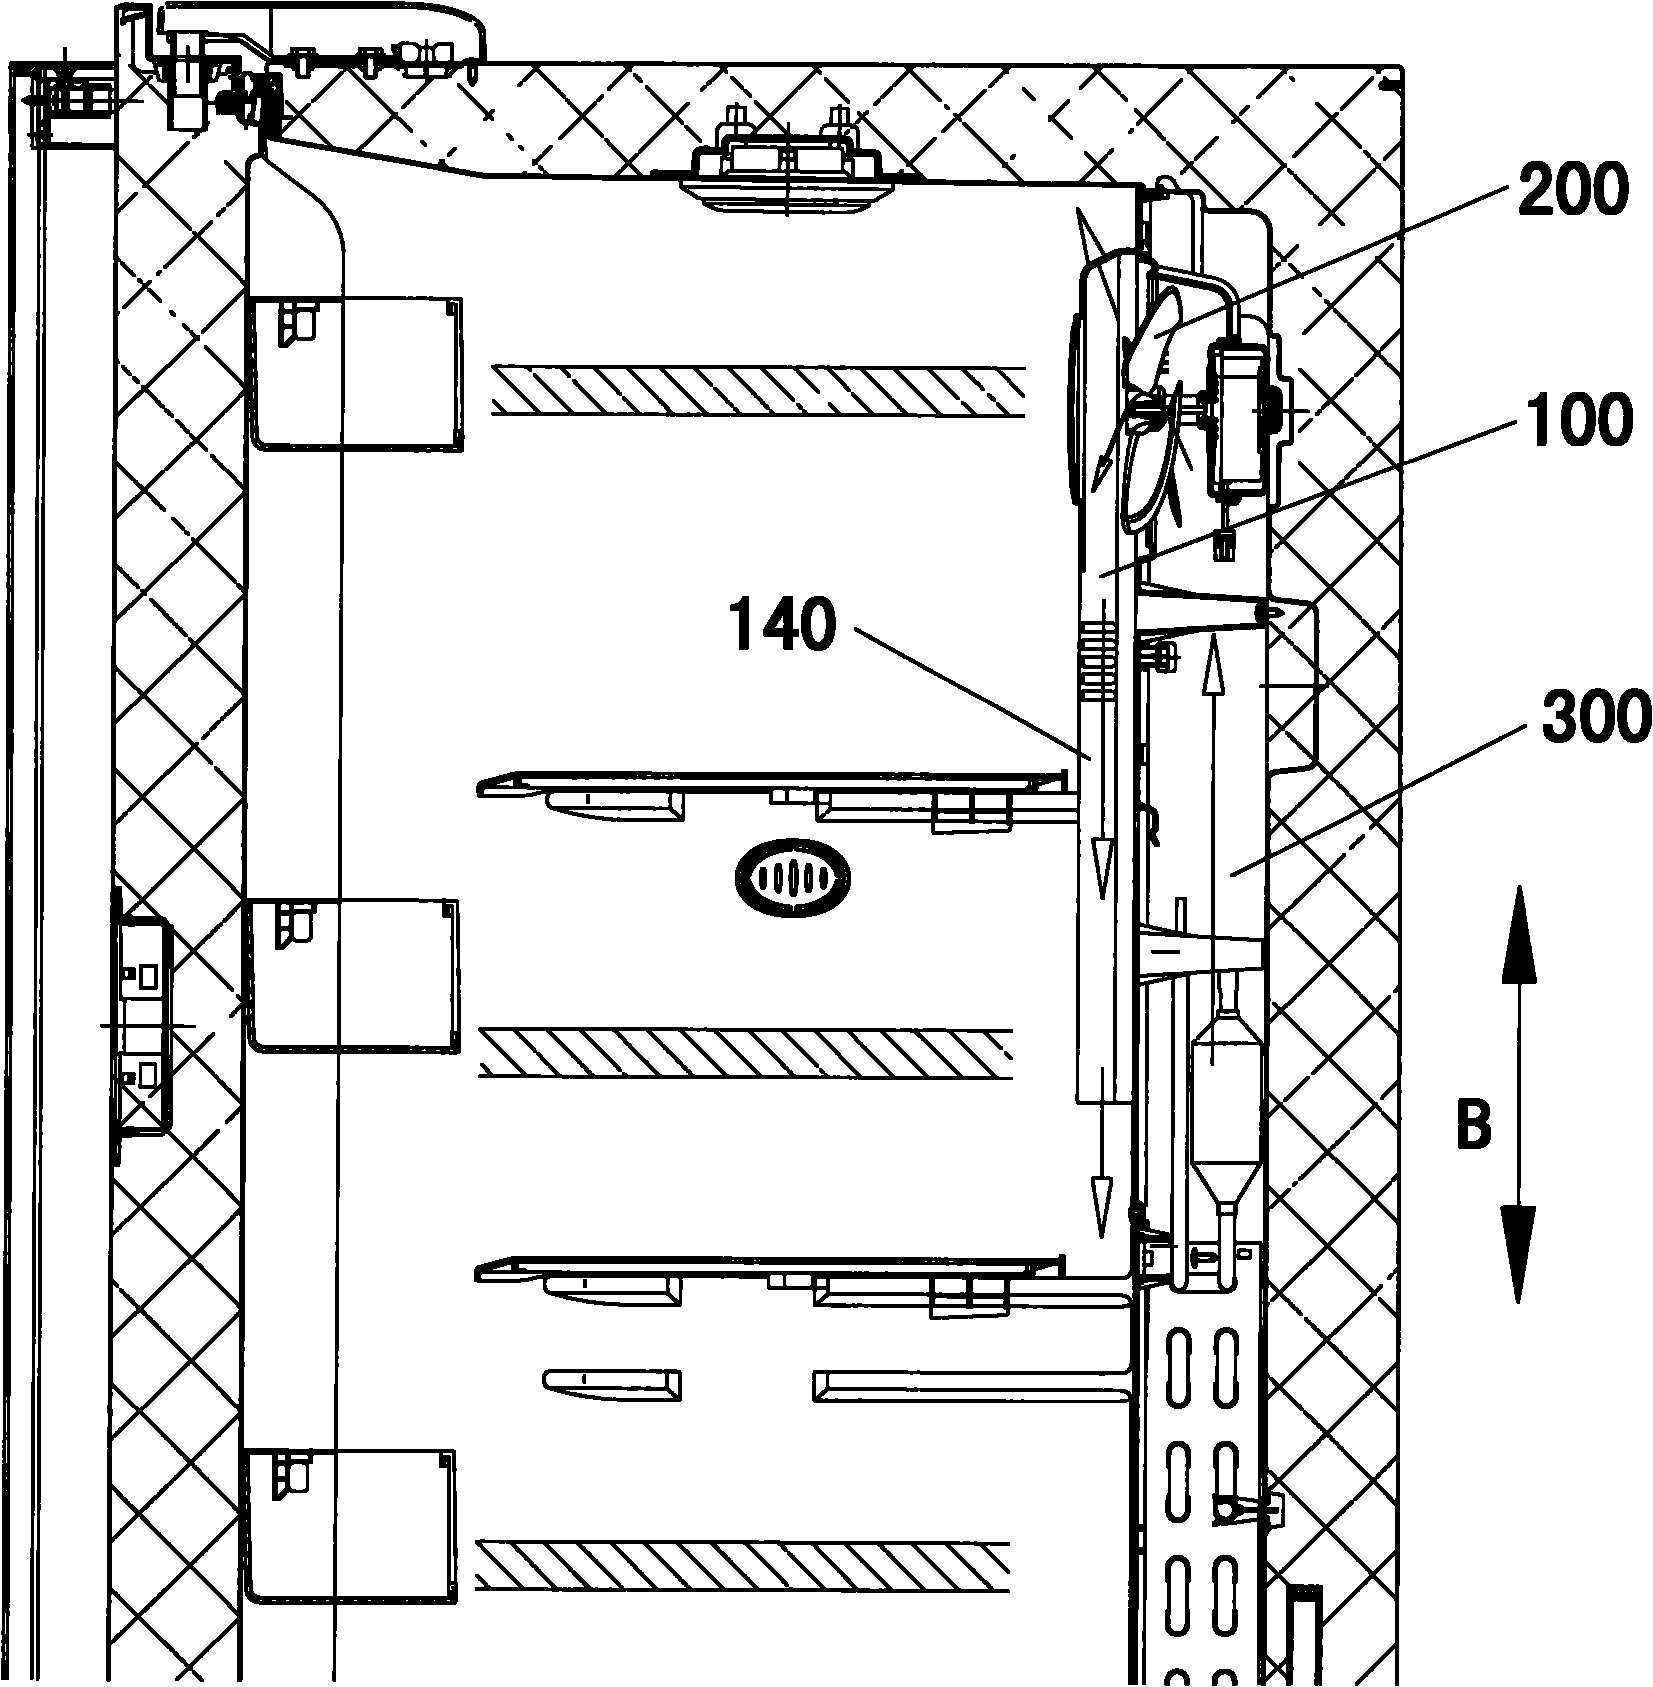 Air-out cover and refrigerator with same